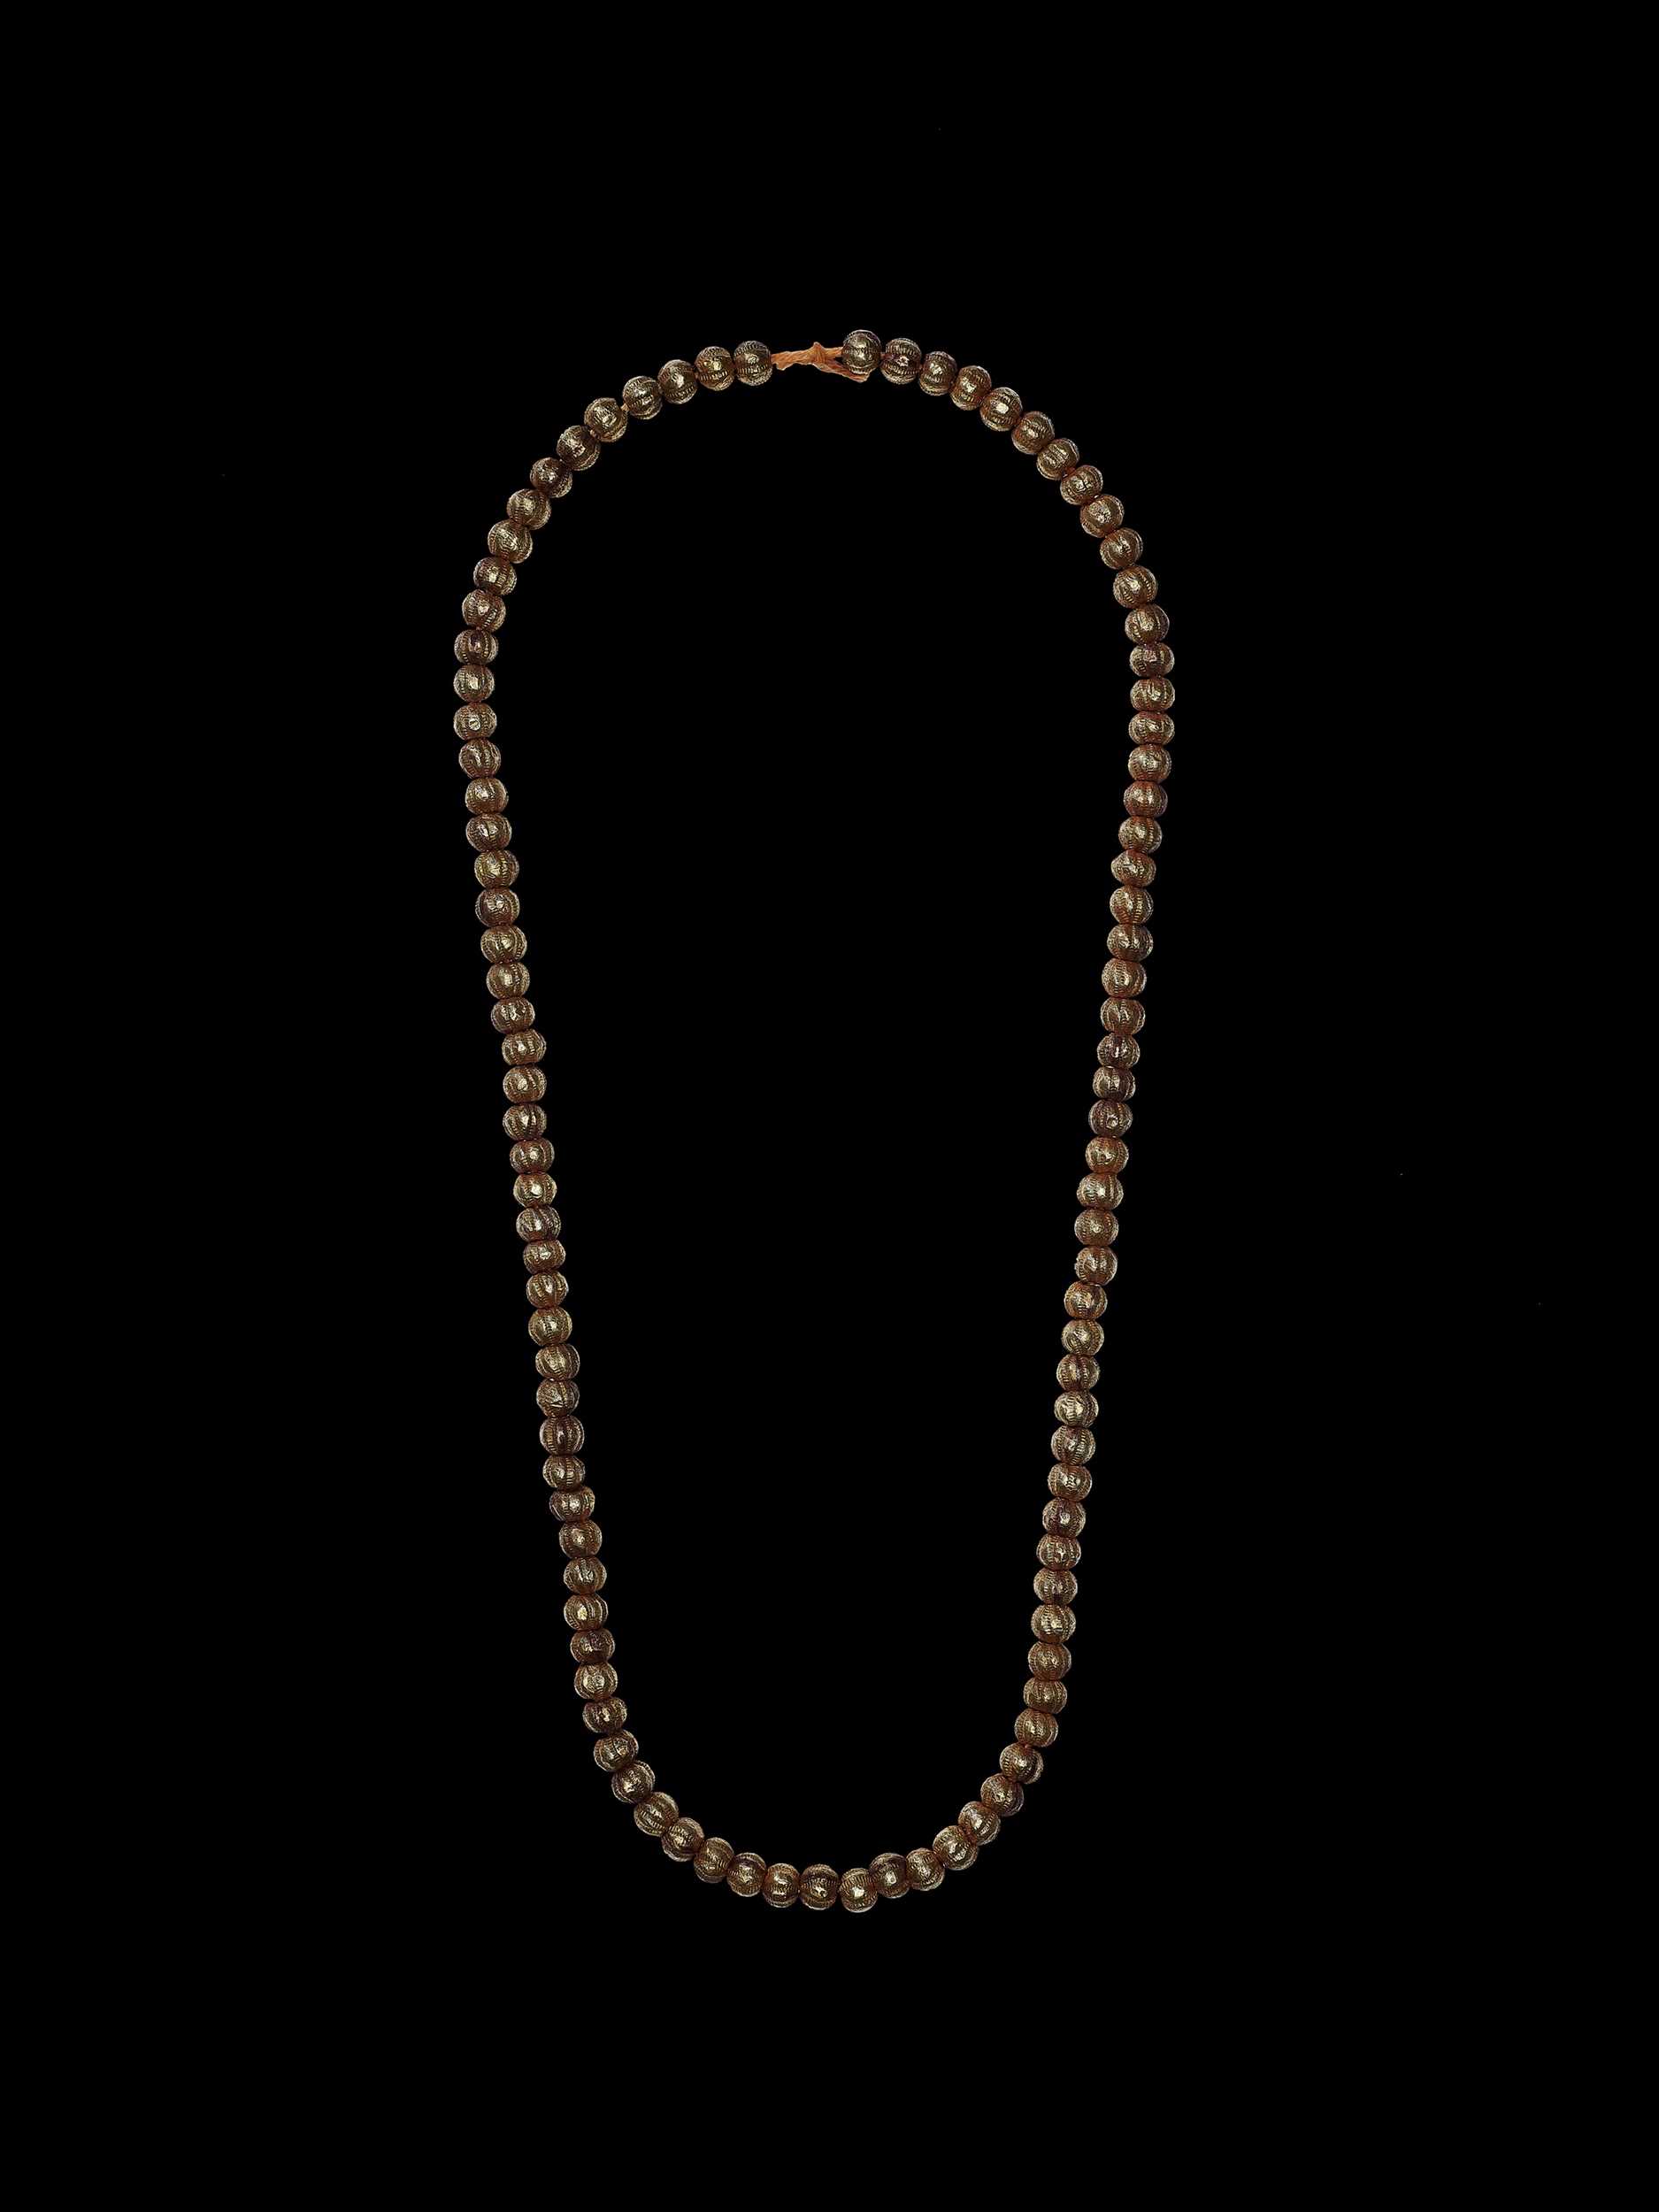 Lot 1275 - A BURMESE NECKLACE WITH 100 GILT DRY LACQUER BEADS